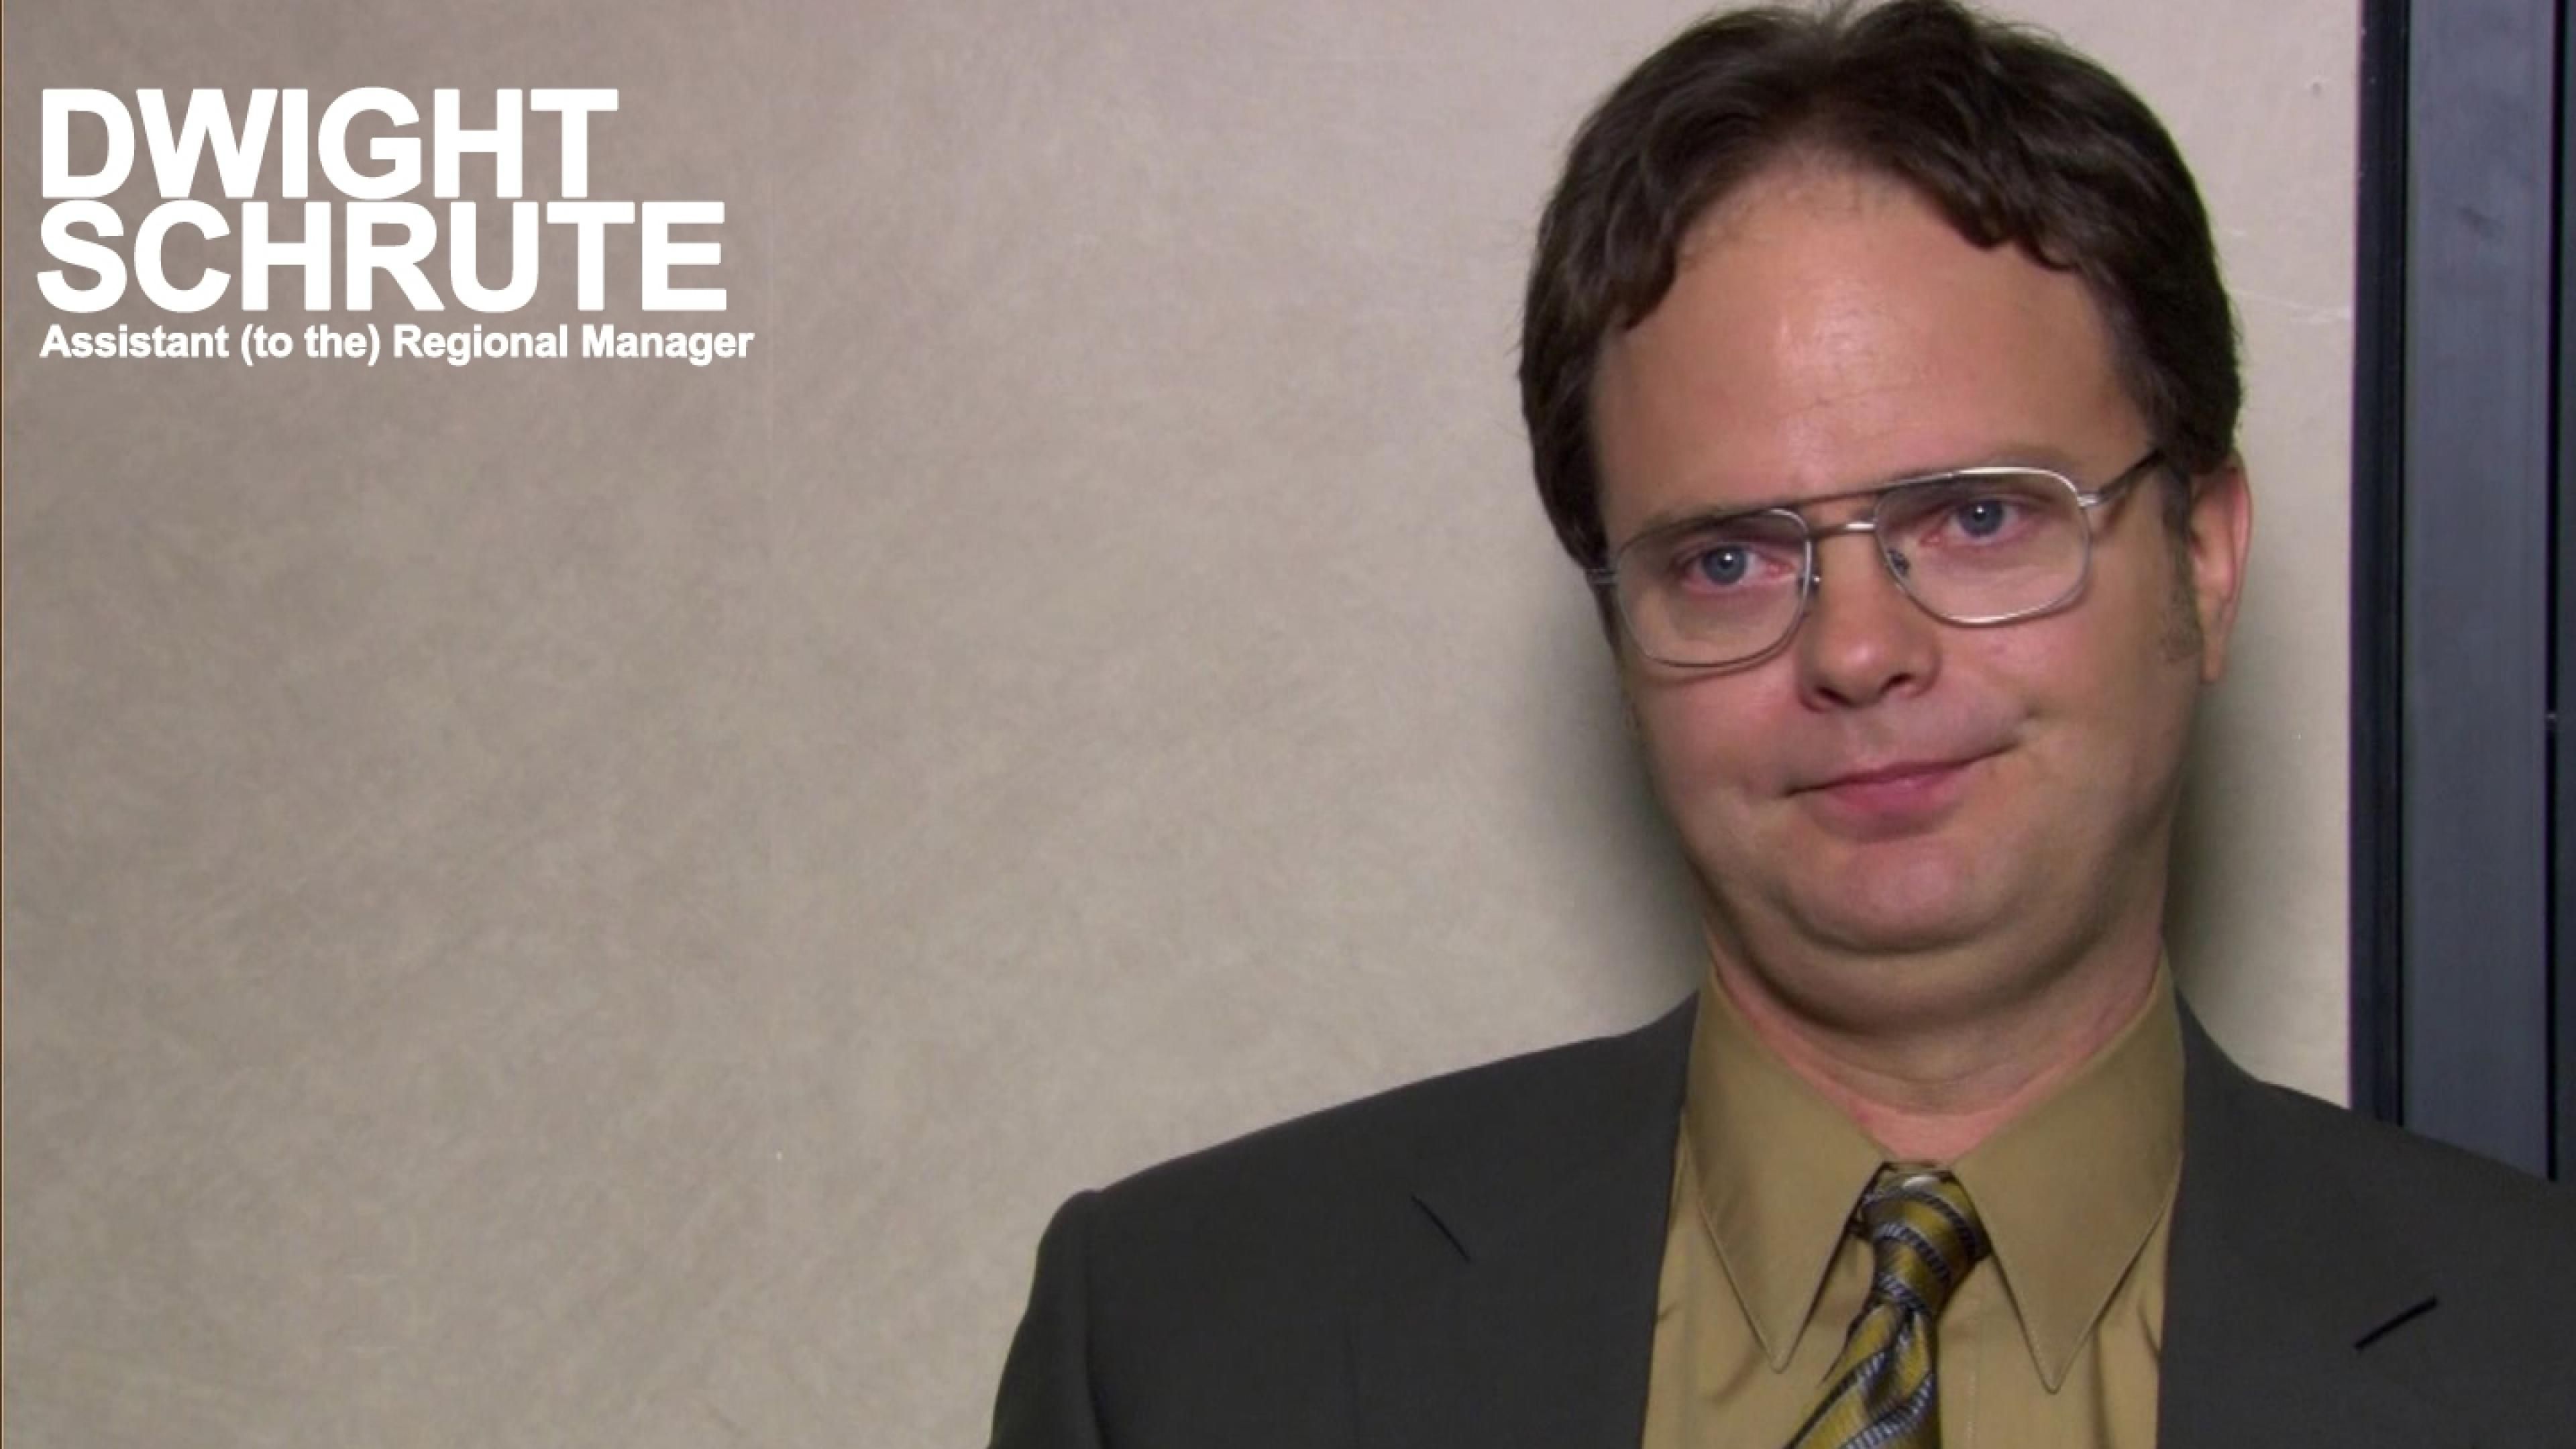 Times We Were All Dwight Schrute. Life lessons